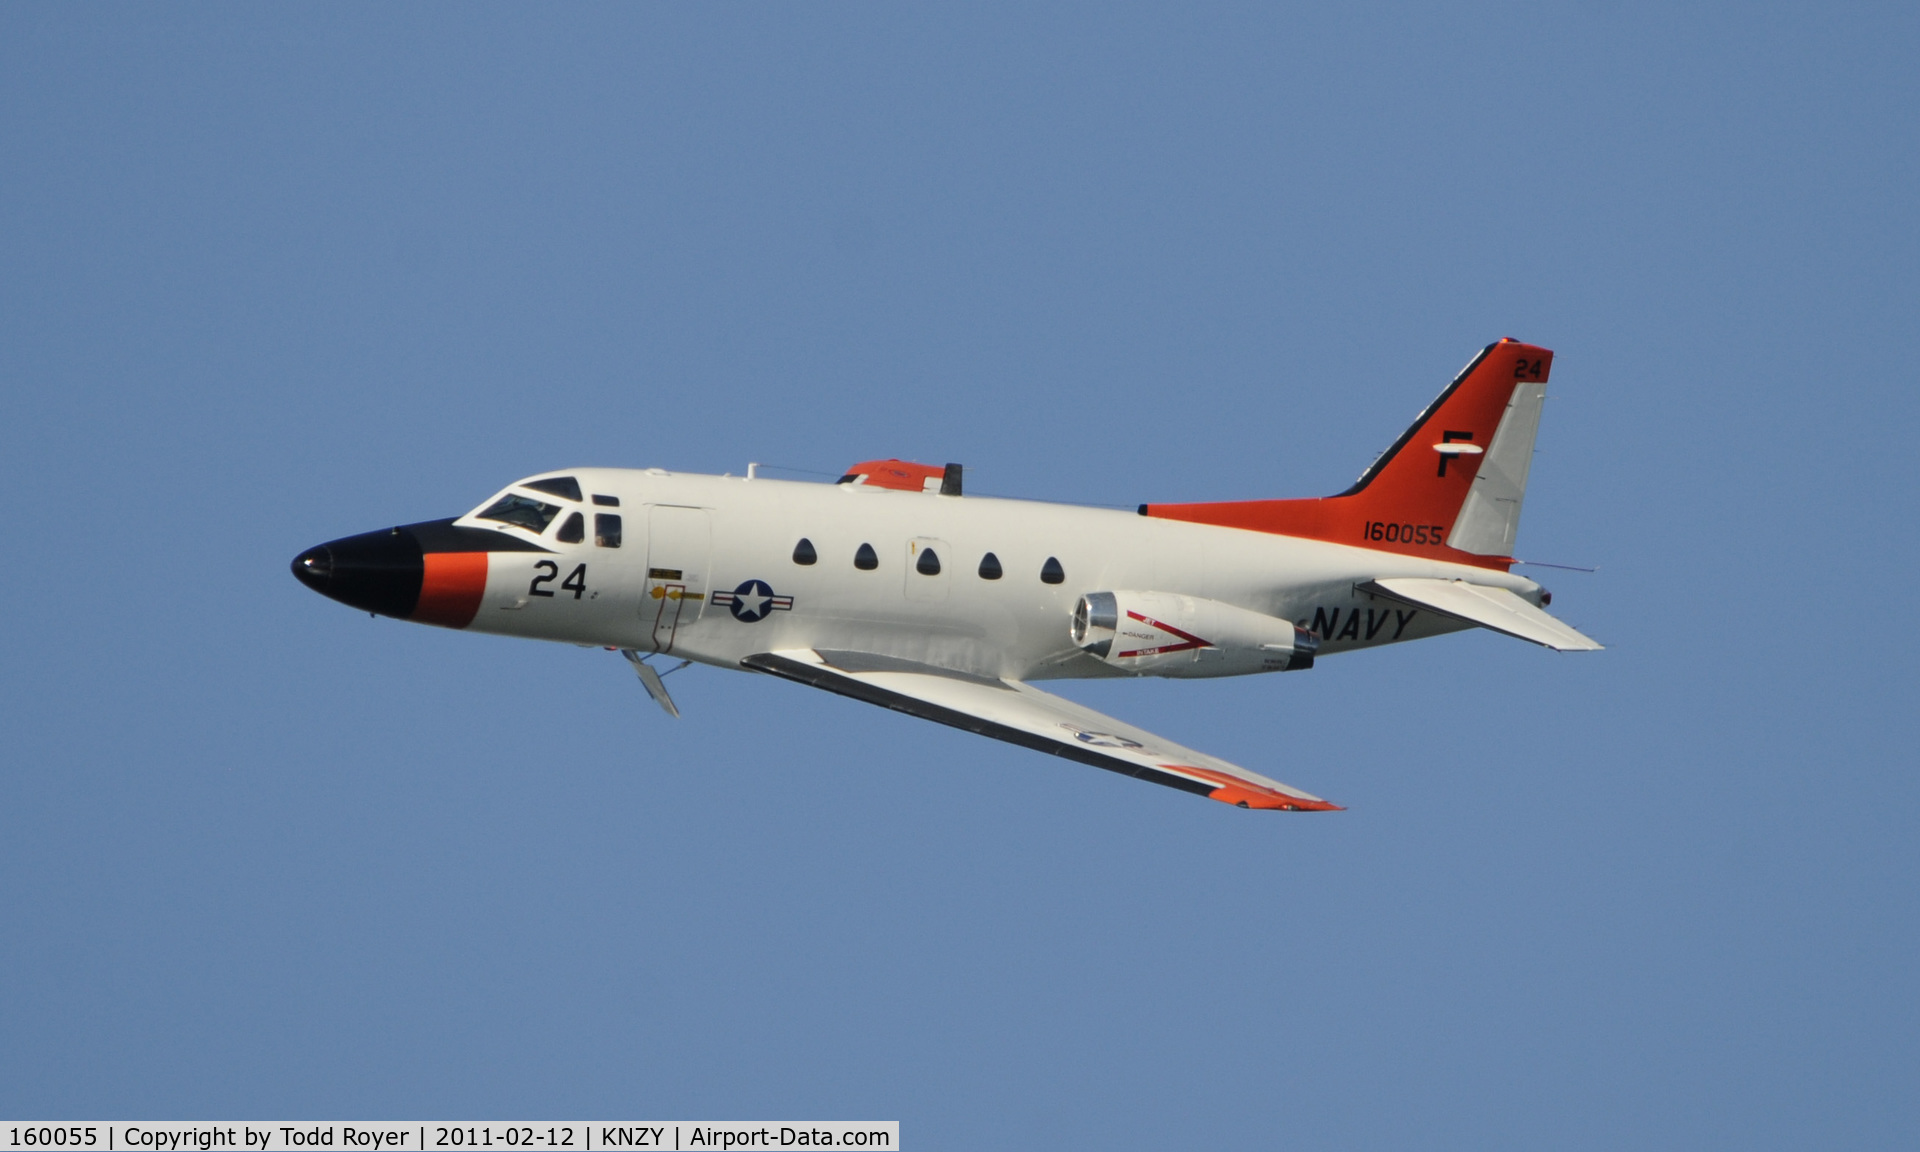 160055, North American Rockwell CT-39G Sabreliner C/N 306-106, Centennial of Naval Aviation